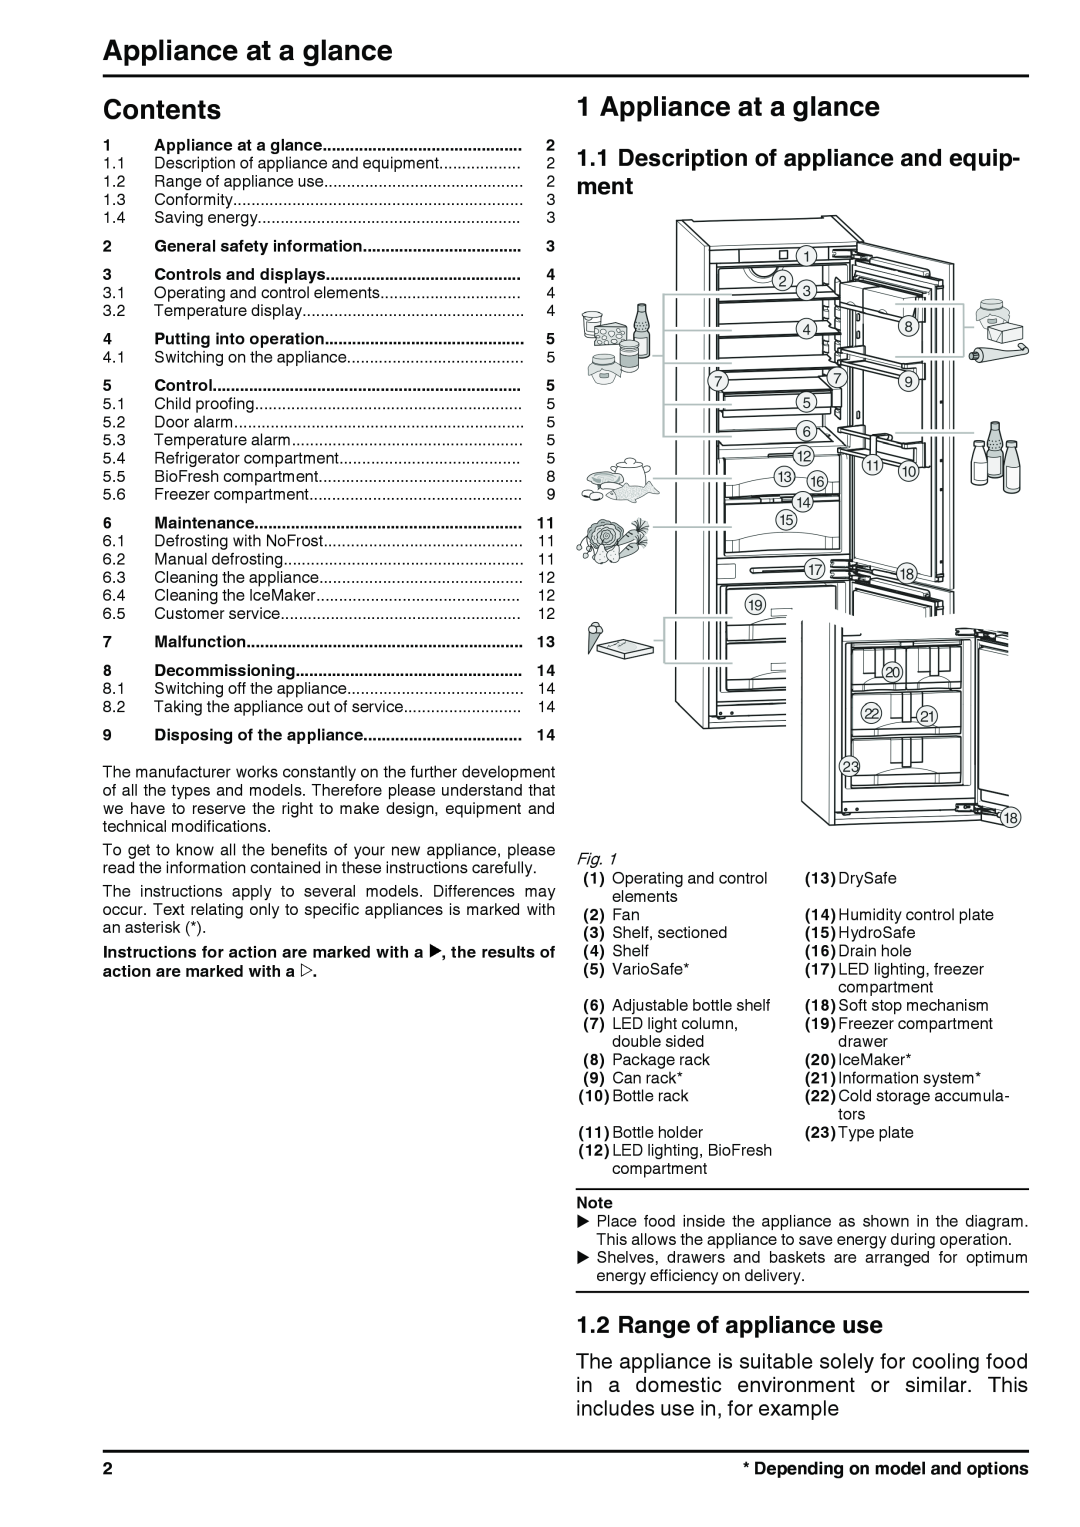 Liebherr 131113 7085462 - 01 Appliance at a glance, Contents, Description of appliance and equip- ment, Control 